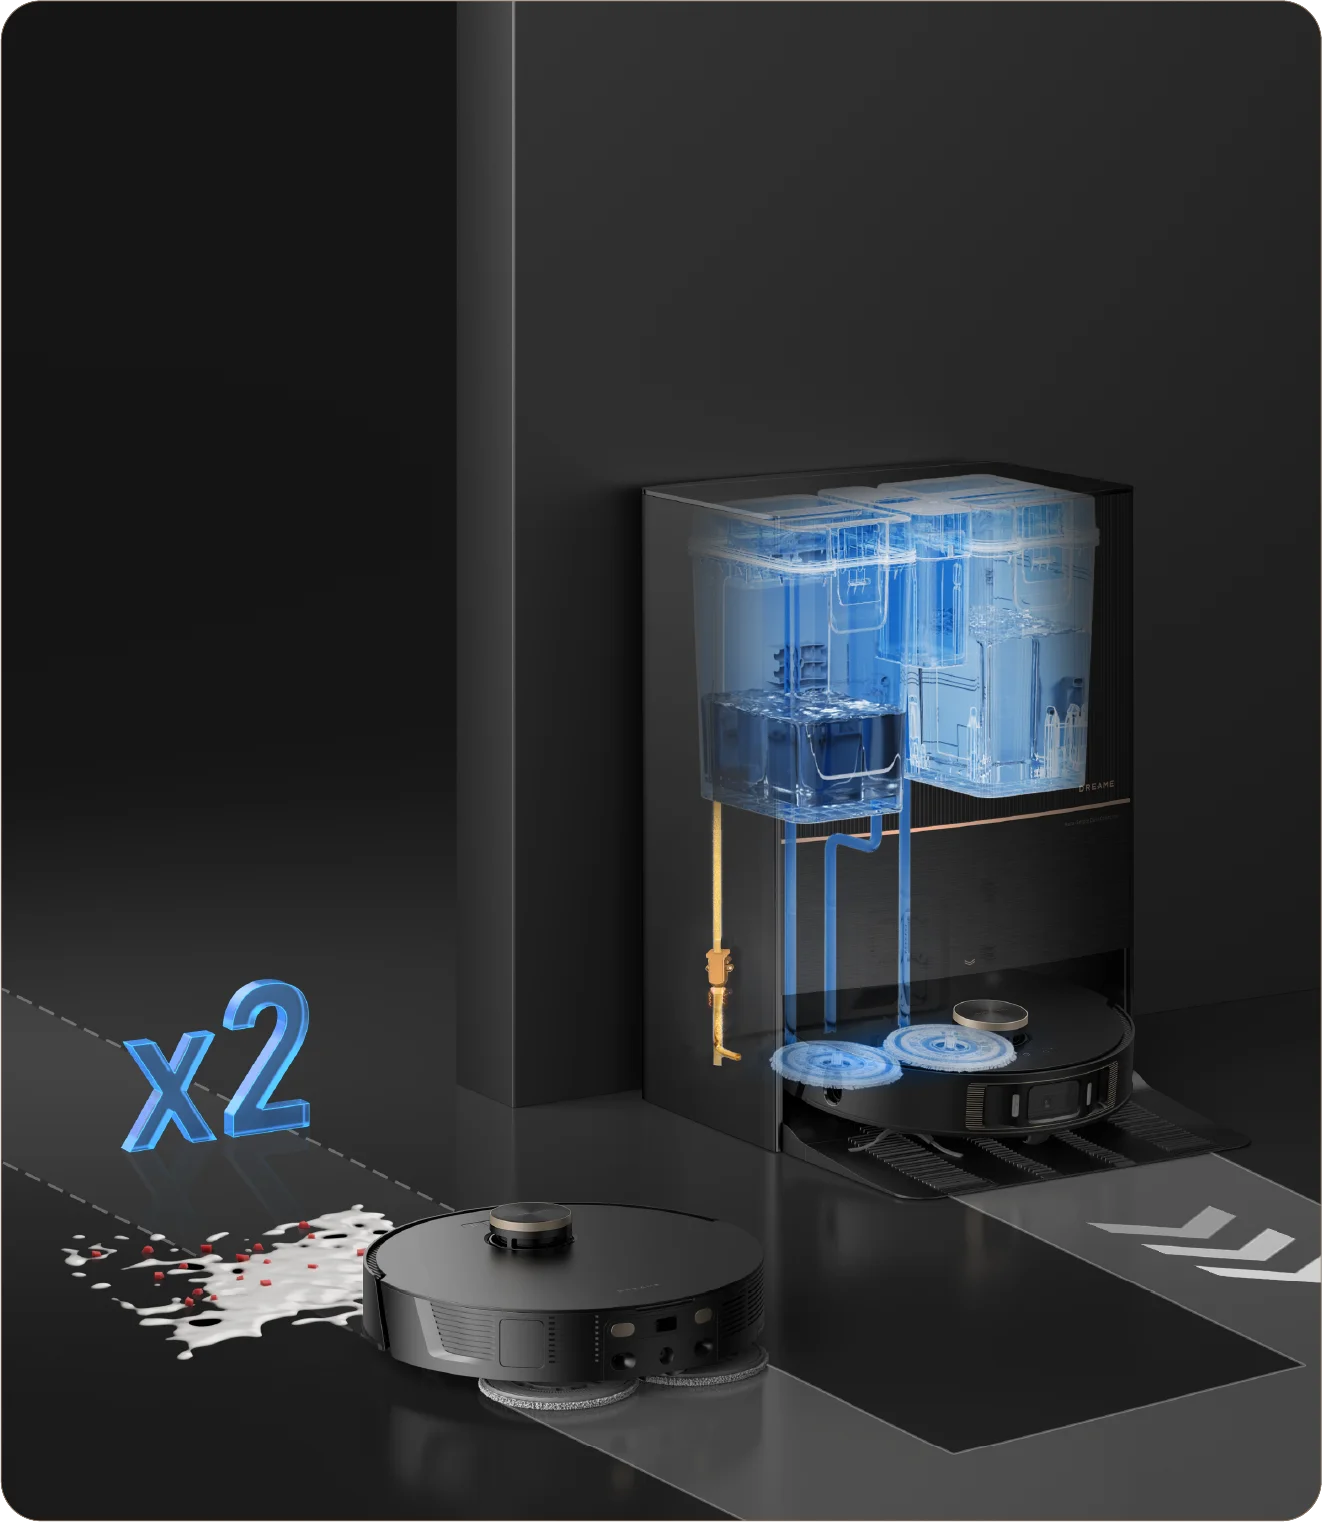 US model L20 Ultra water re-fill kit and initial thoughts so far :  r/Dreame_Tech